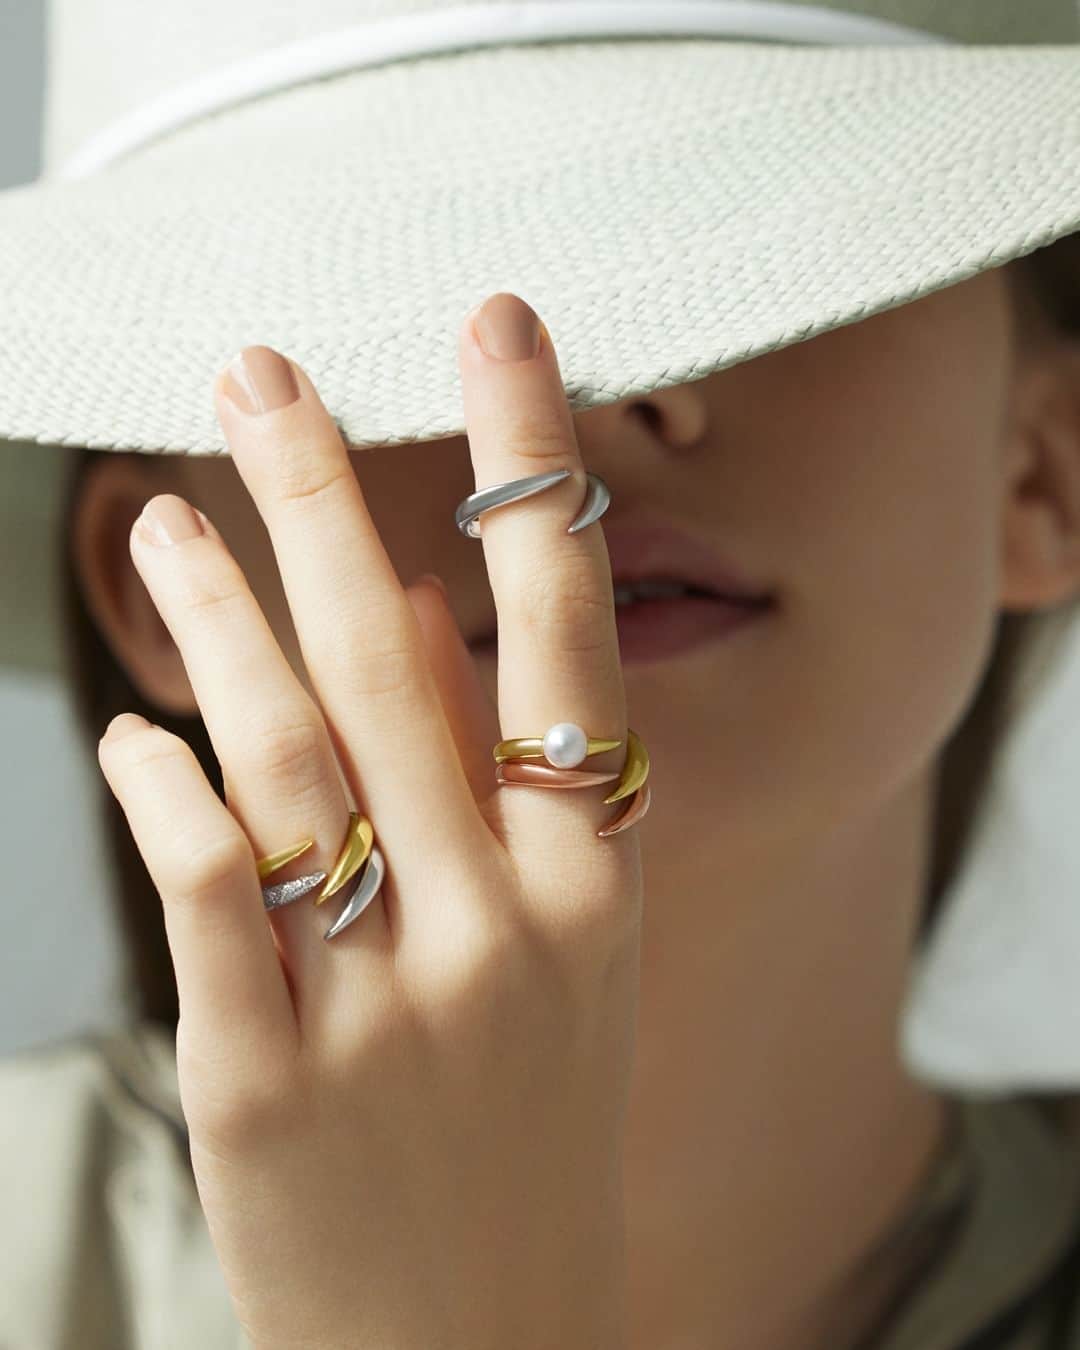 TASAKIのインスタグラム：「A curved horn boldly wraps around the finger in the stunning 'danger horn plus' ring. This sleek design can be stacked to create a tantalising mix, a playful way to add a unique twist to your look.​  ホーン(角)のカーブラインで指を包み込む「danger horn plus」の優美なリング。​ 素材違いで、ユニークな重ね着けもできるデザインに注目！​ 遊び心に溢れるレイヤードスタイルが新鮮に映ります。  #TASAKI #TASAKIdanger #TASAKIpearl」